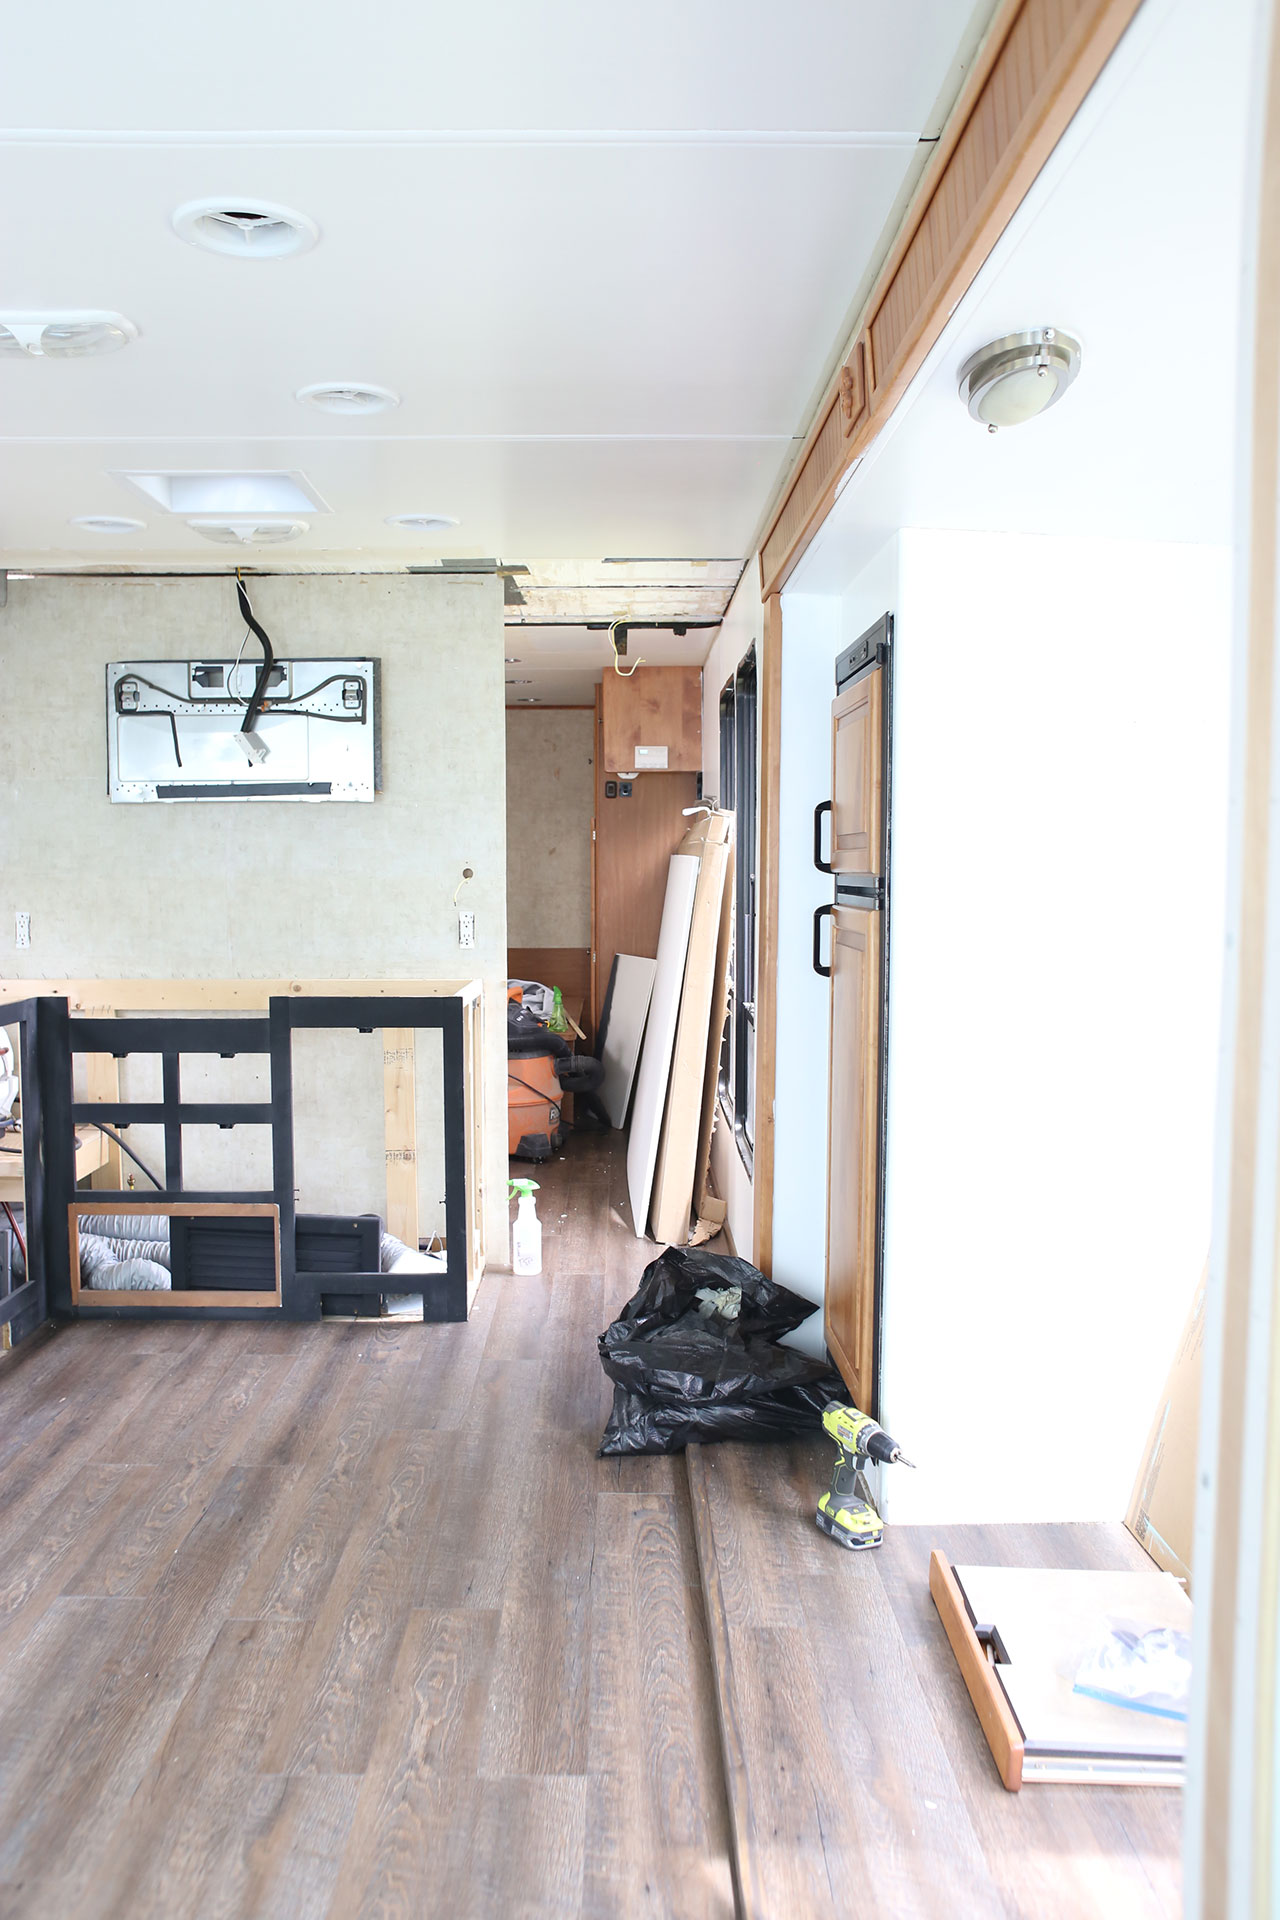 How to Replace RV Flooring